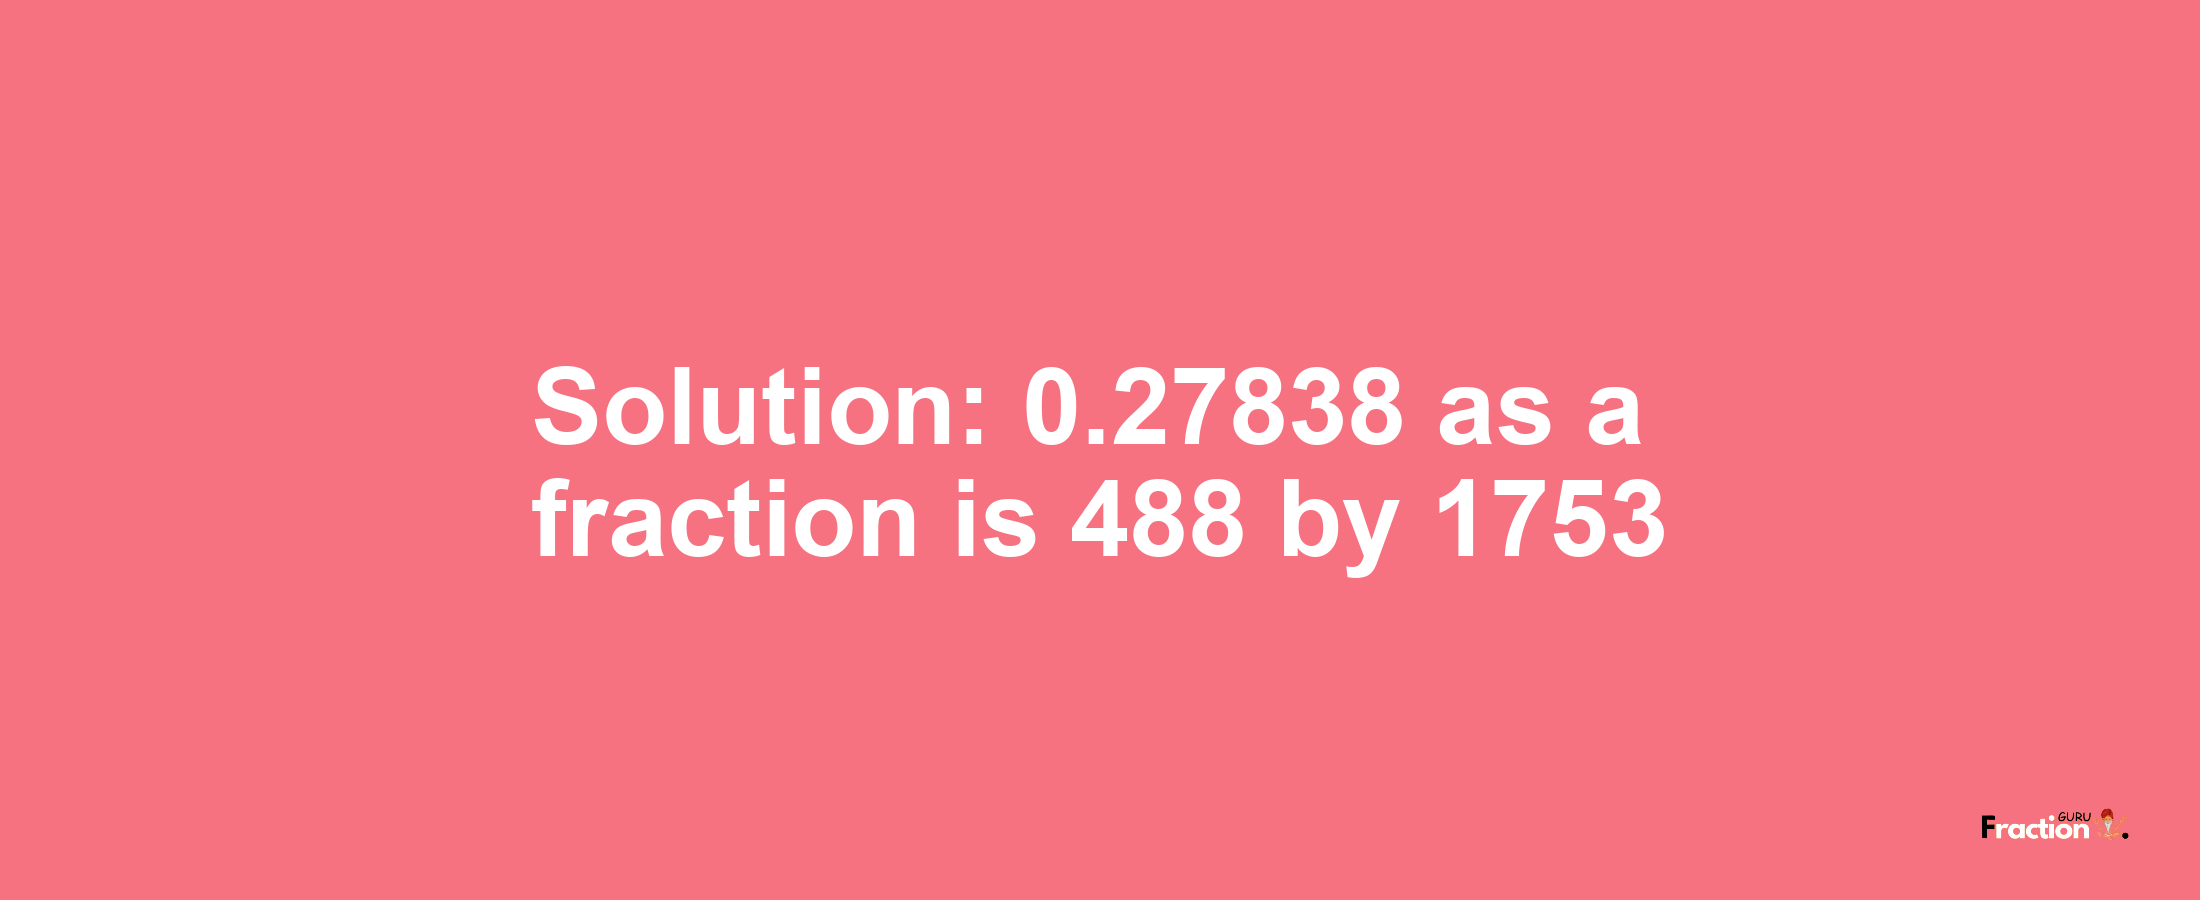 Solution:0.27838 as a fraction is 488/1753